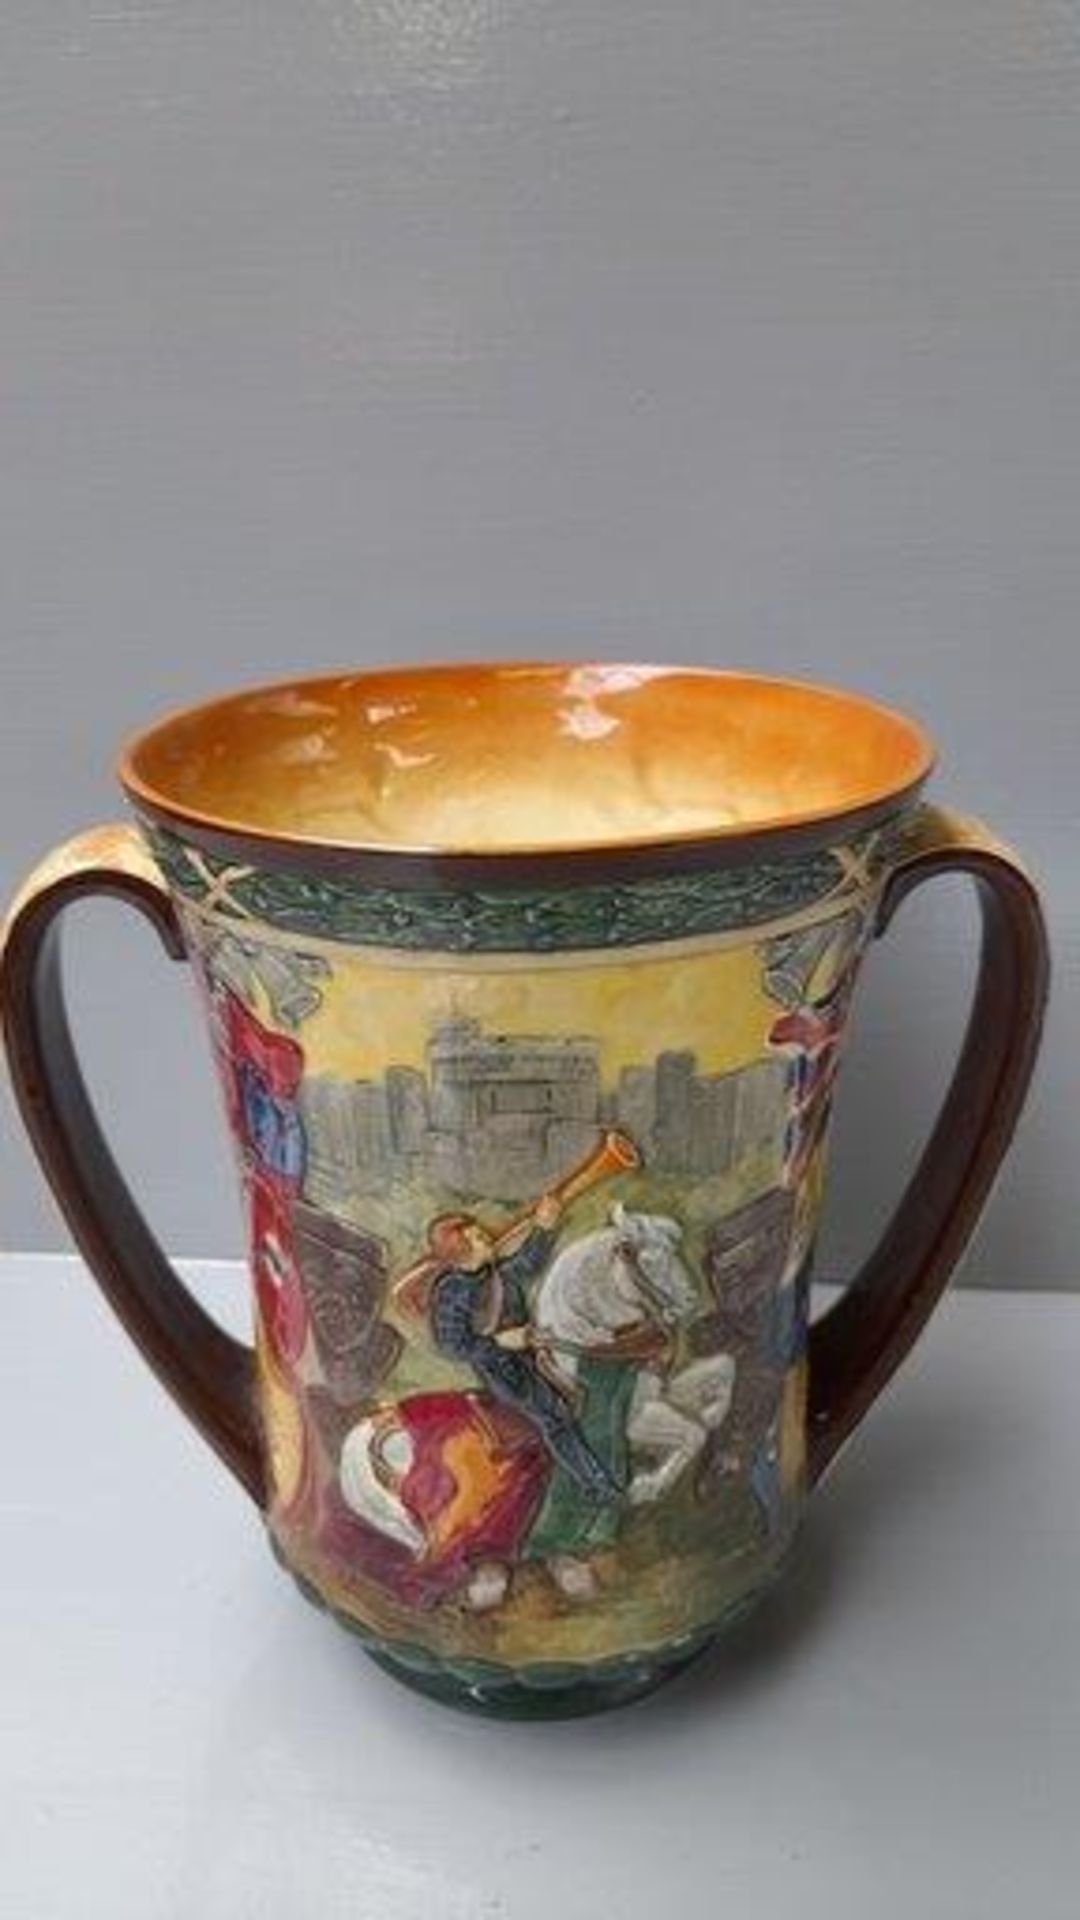 Royal Doulton 'The Loving Cup' January 1936 December To Celebrate The Reign Of His Gracious Majesty 